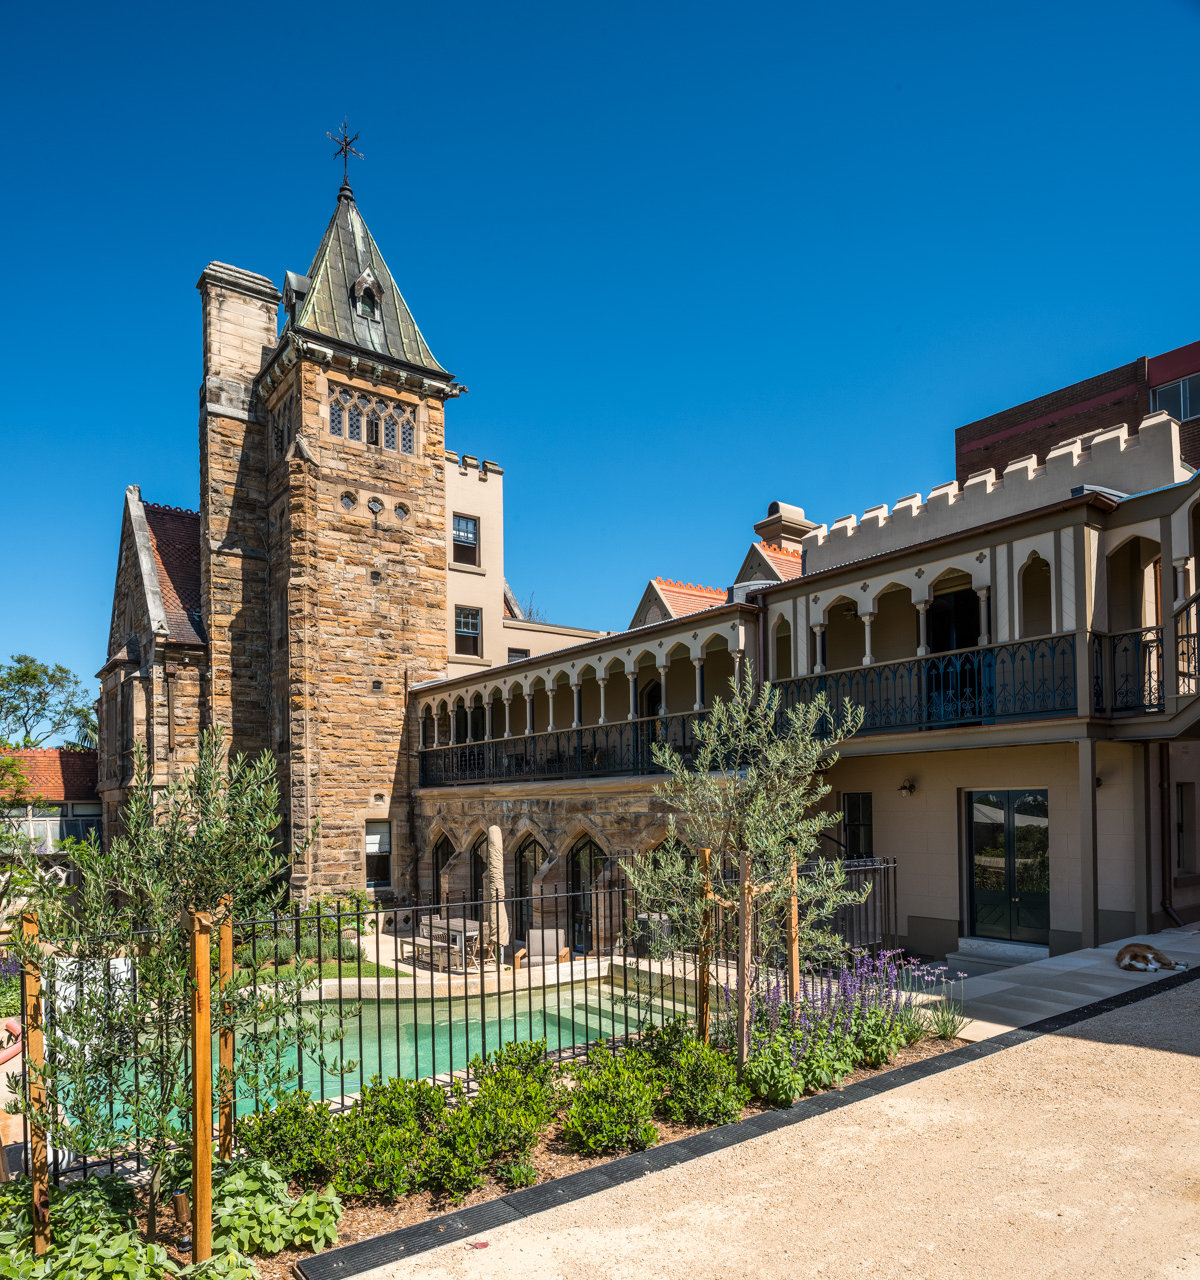 The Abbey, Annandale, NSW